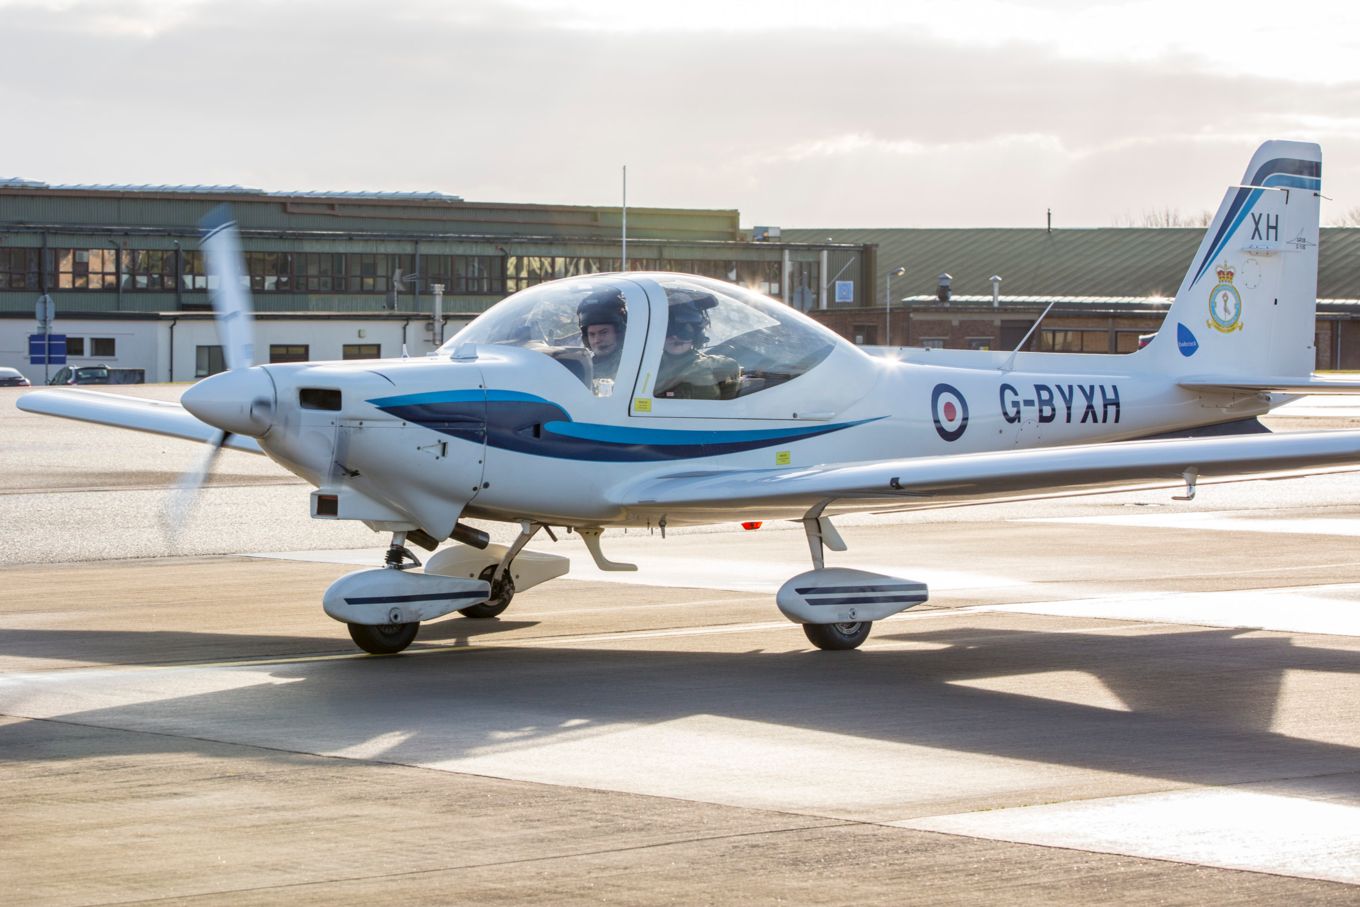 Flt Lt Latchem and 16 Sqn Student return from a training sortie in a Grob Tutor aircraft